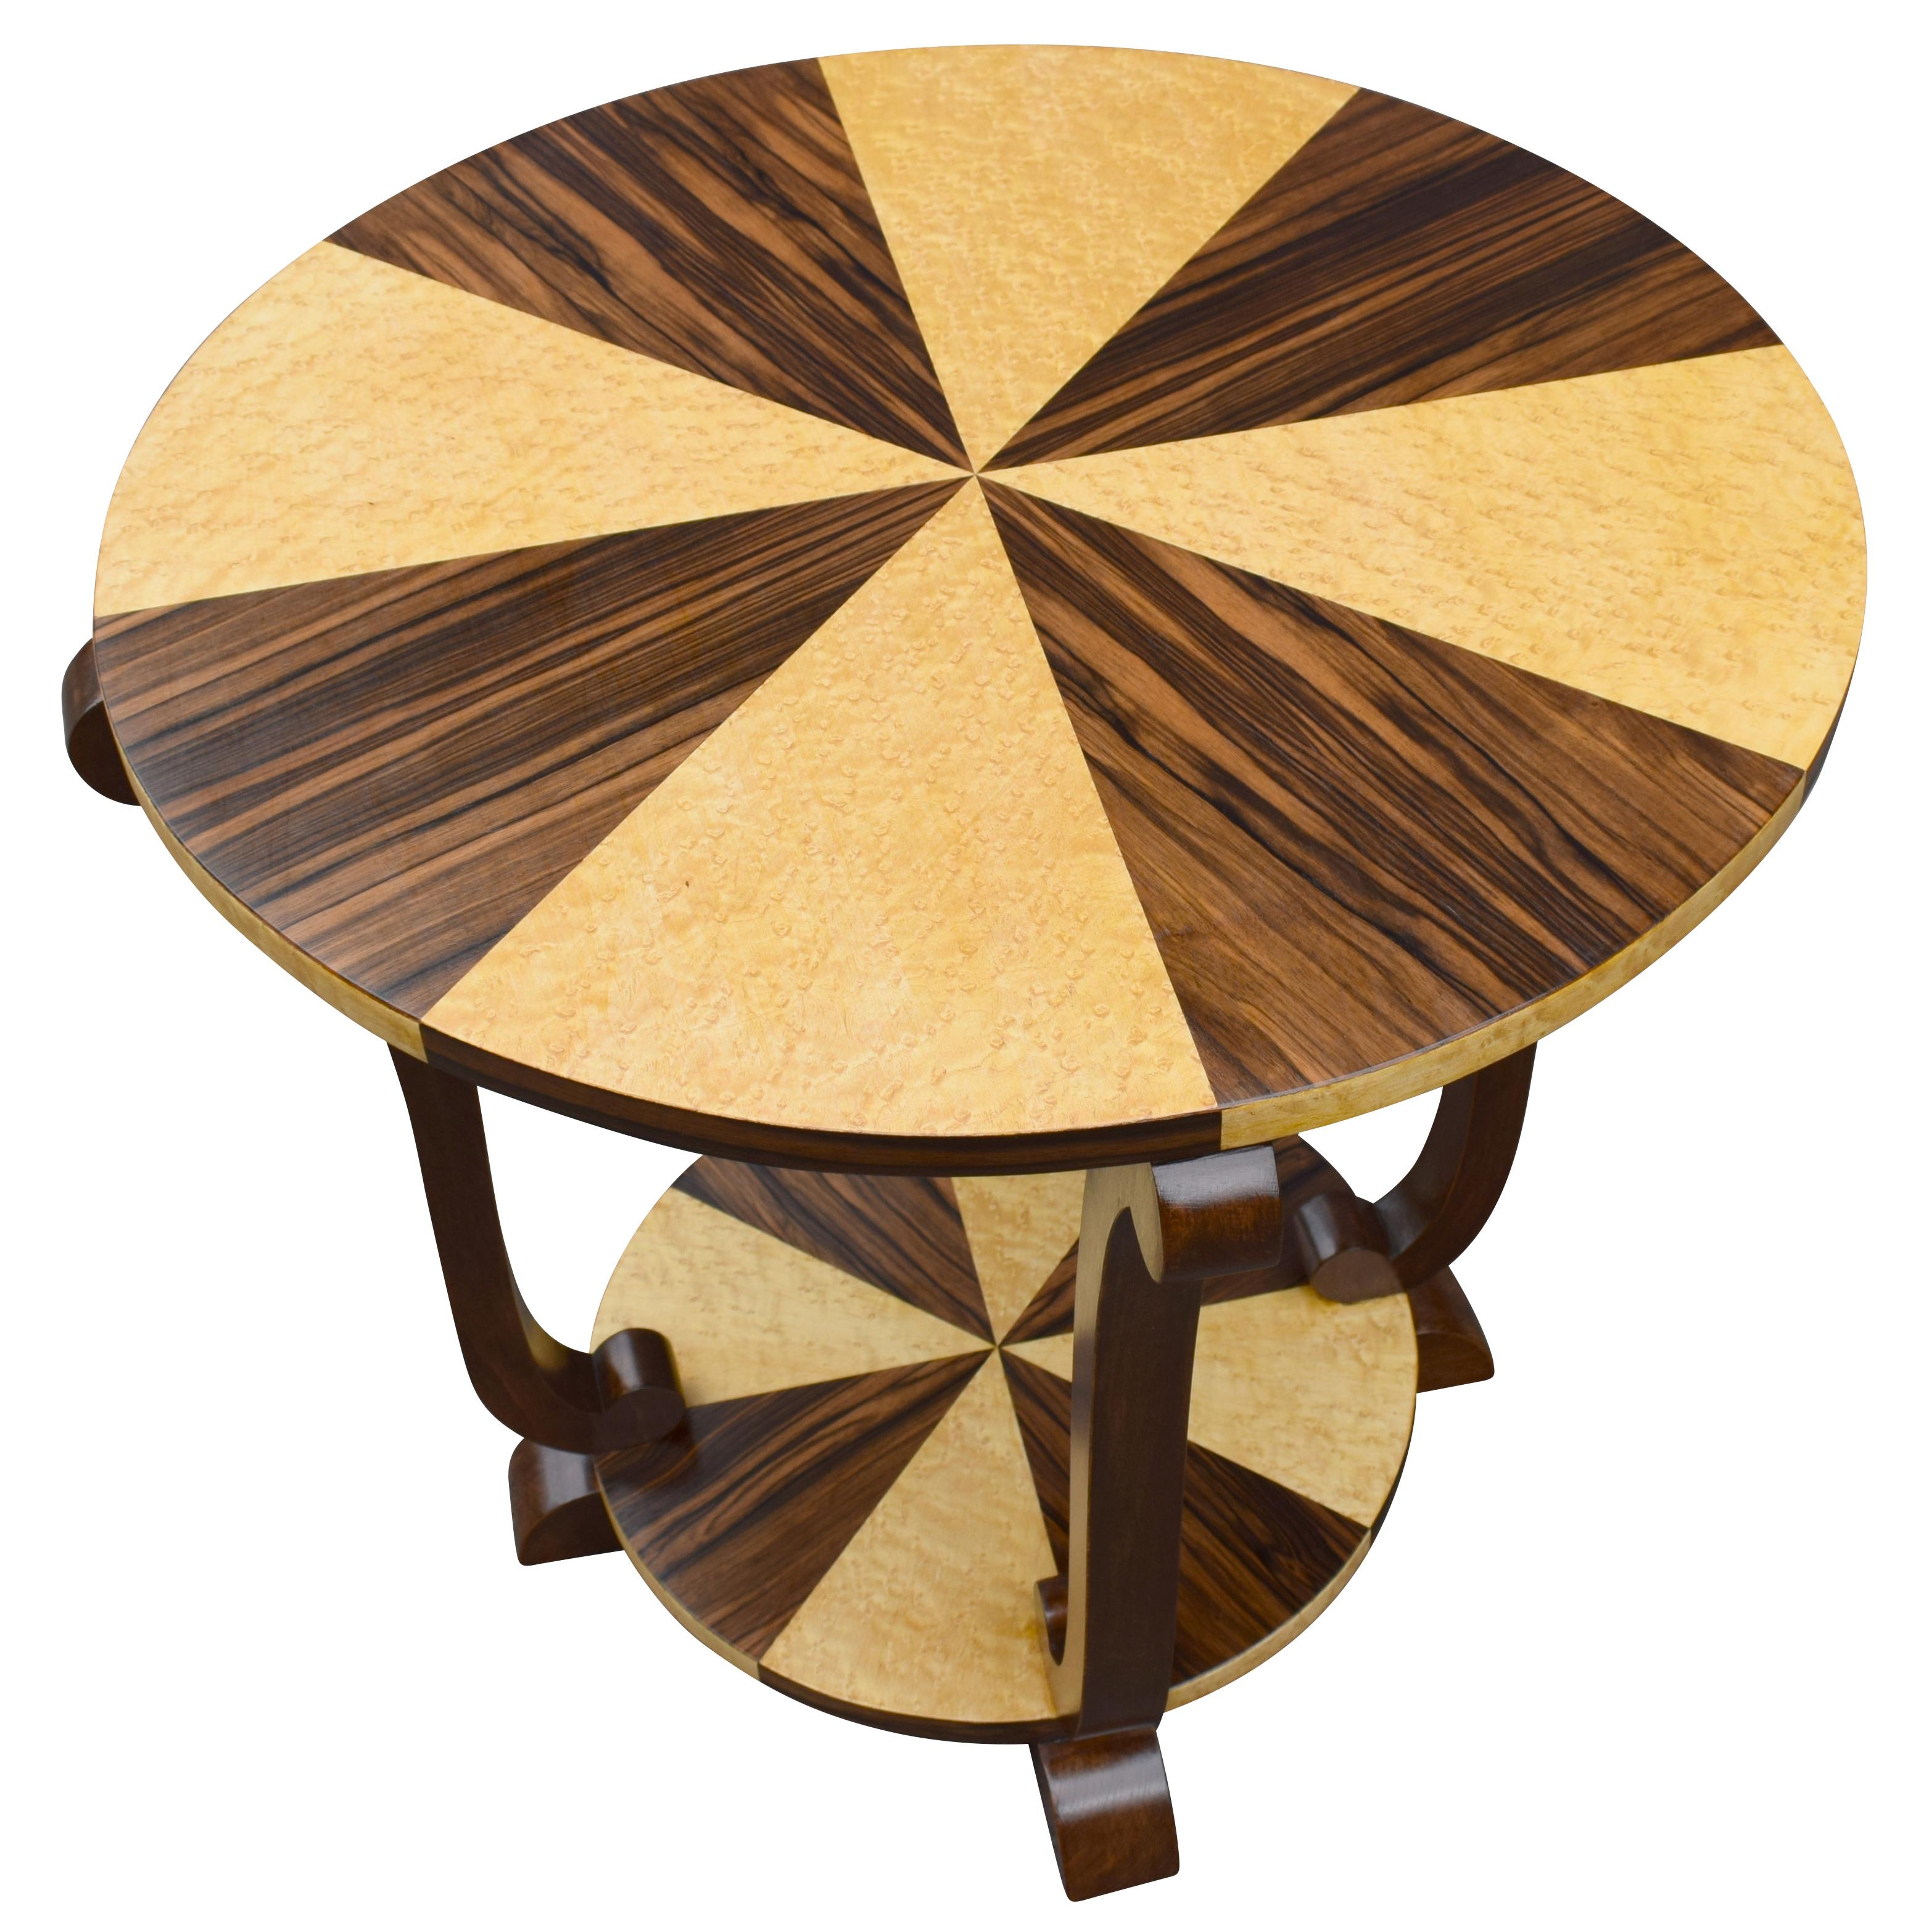 Birdseye Maple Art Deco Two-Tier French Centre Table in Walnut and Maple, circa 1930